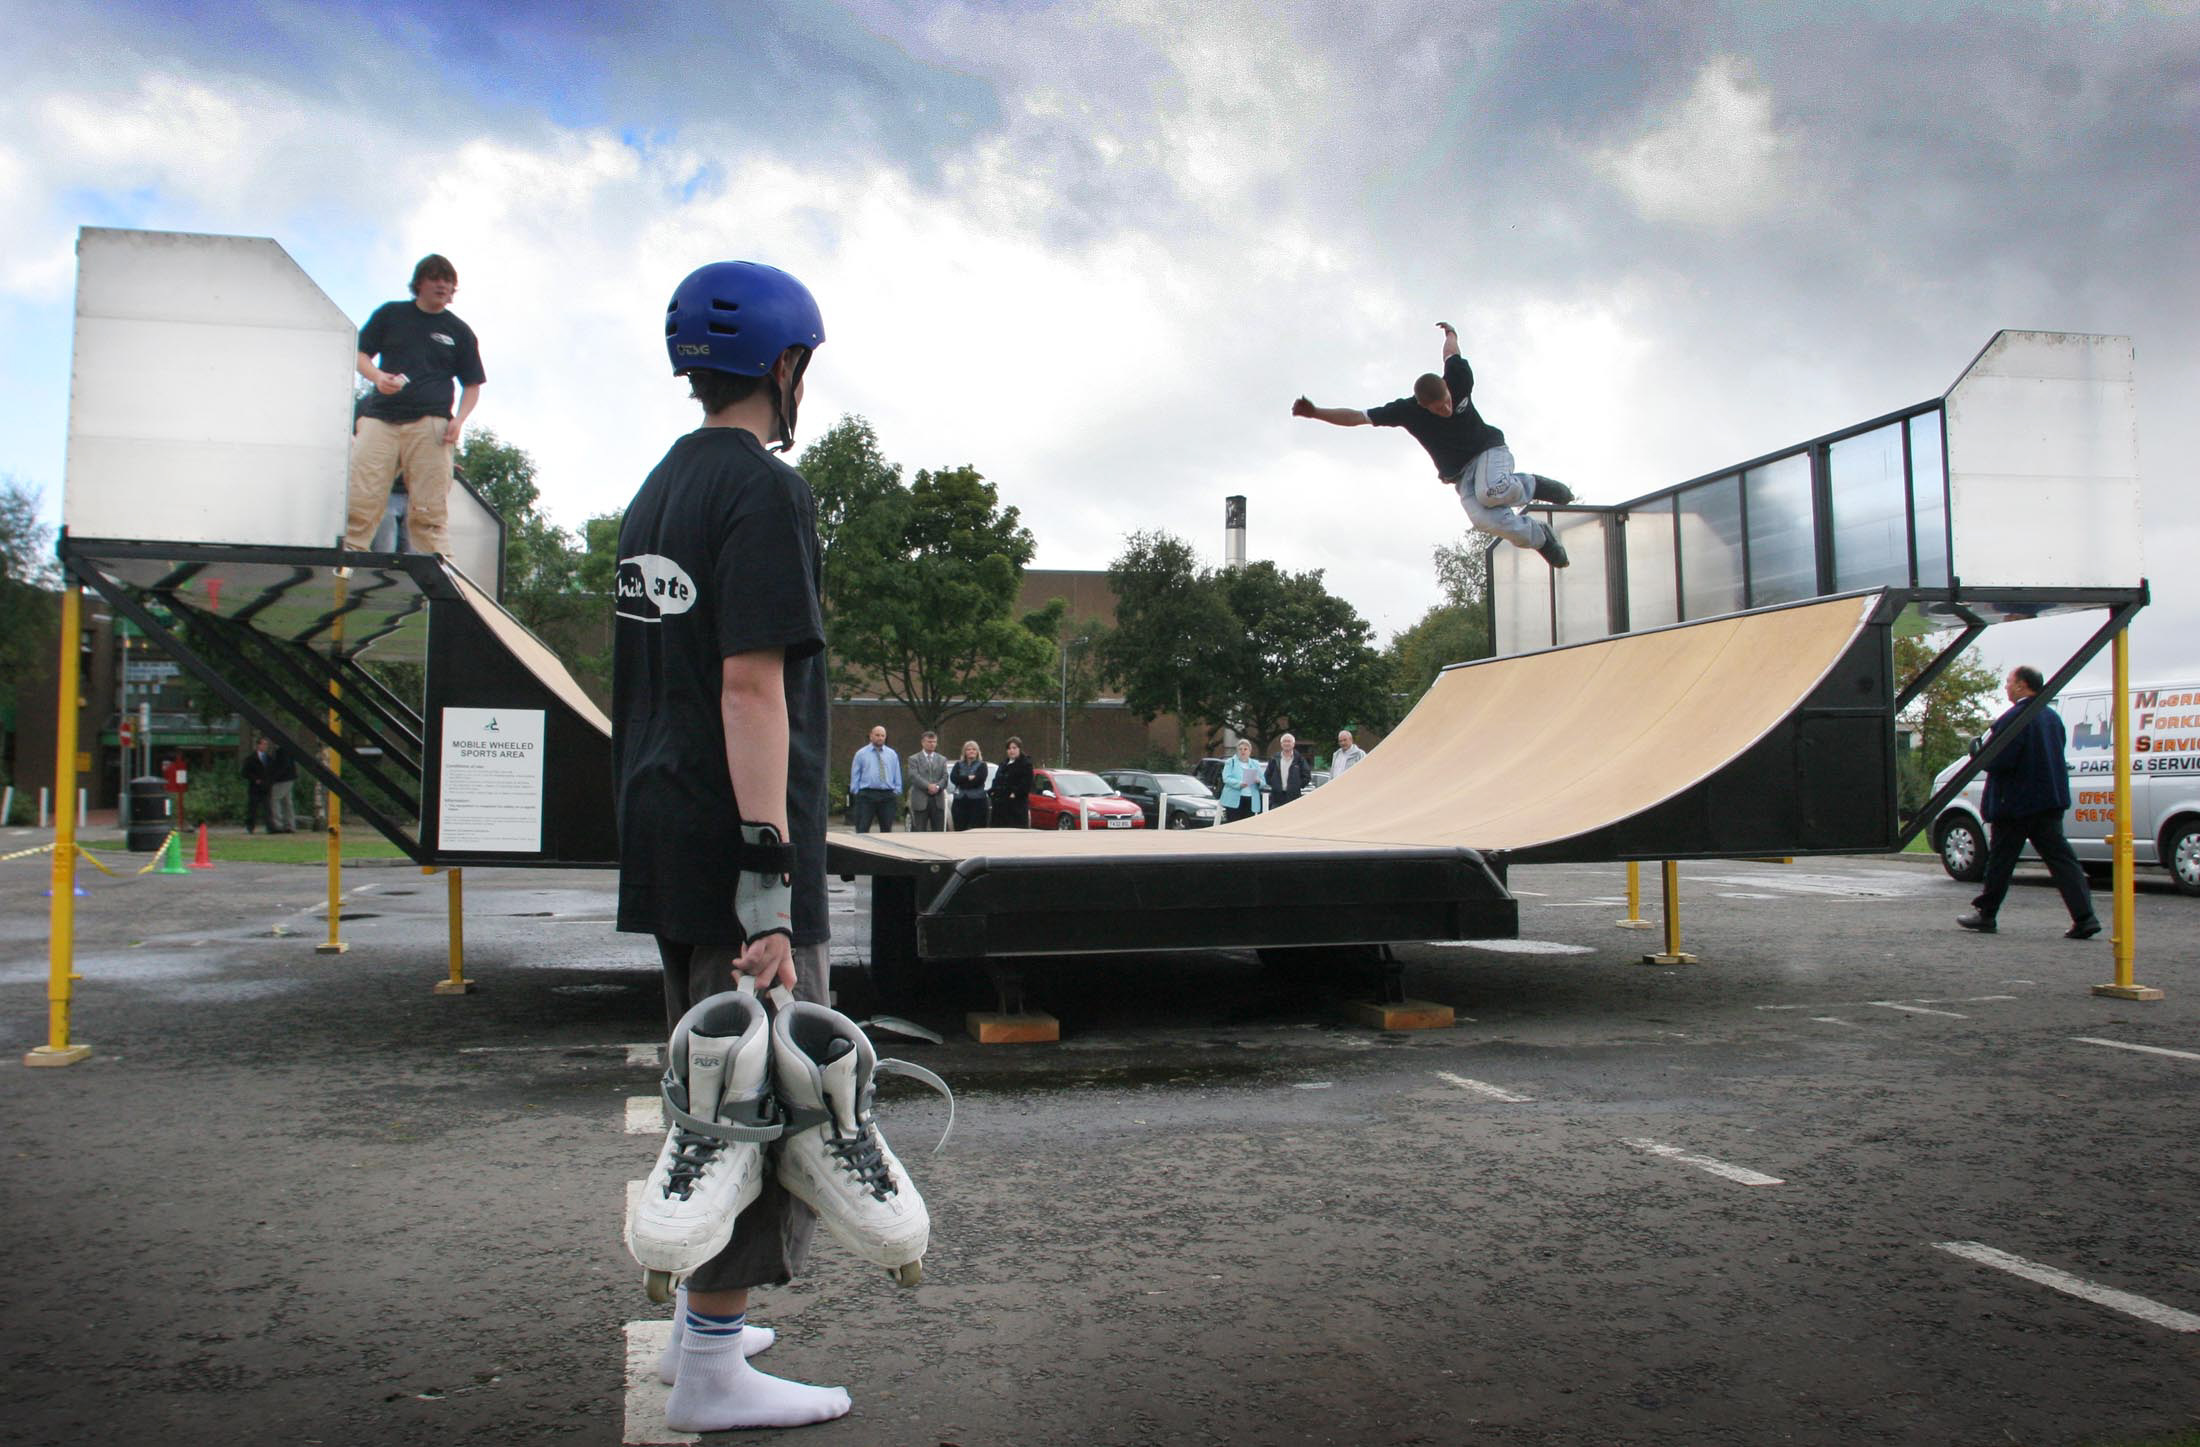 The mobile half-pipe was unveiled in 2005.